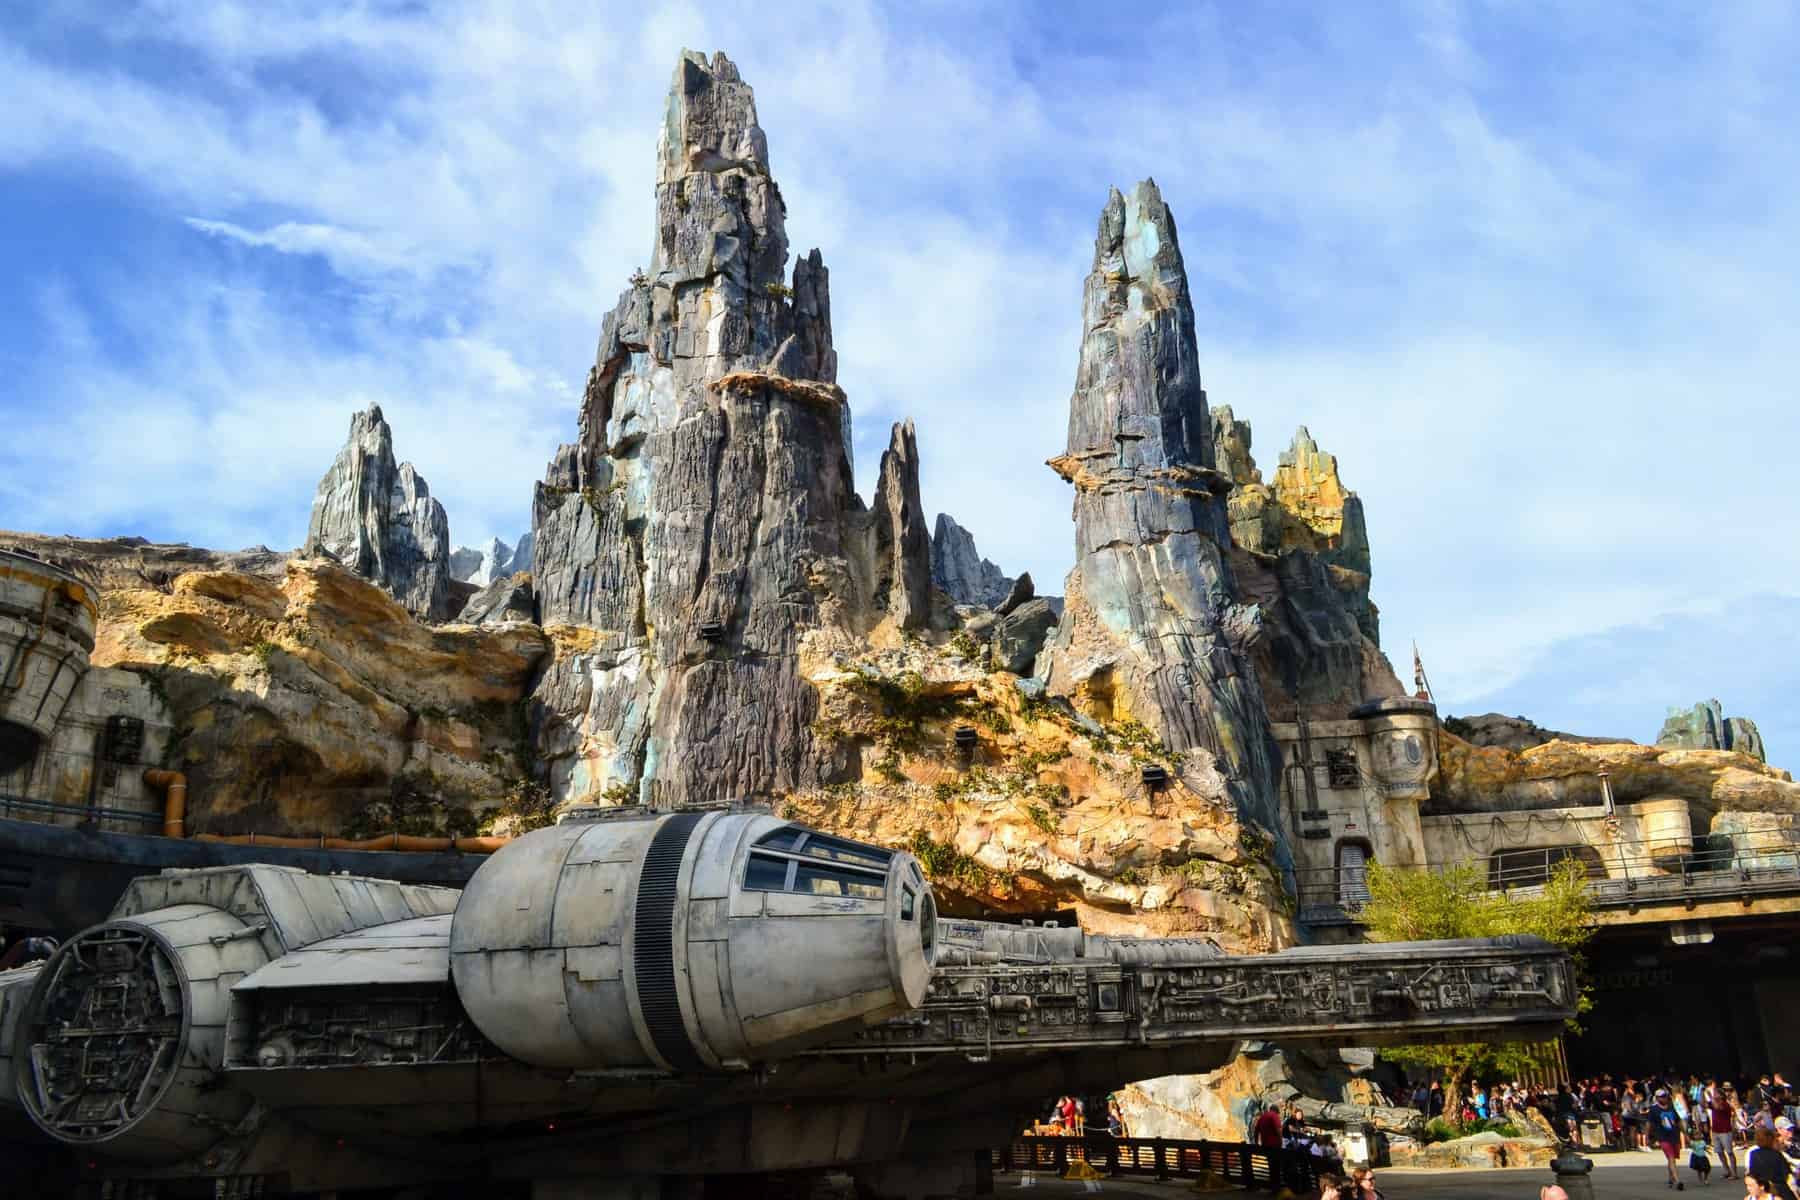 Planning tips for Star Wars: Galaxy’s Edge at Hollywood Studios